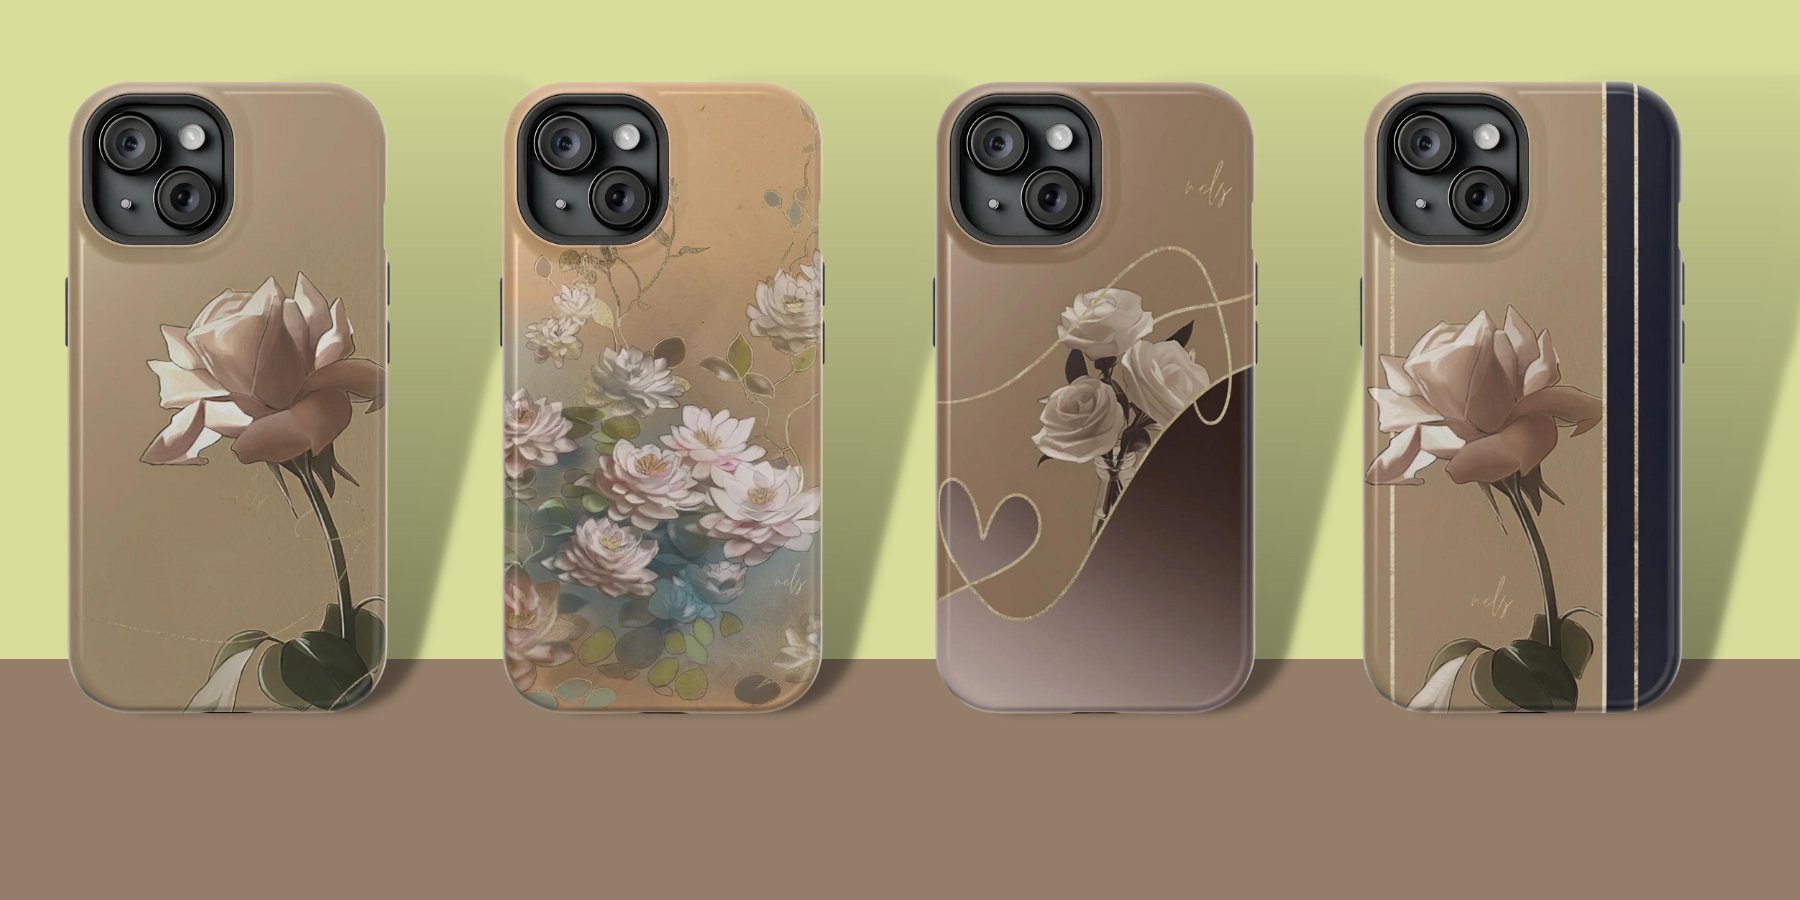 The CLASPP Faith Sycaoyao Collection of phone case designs